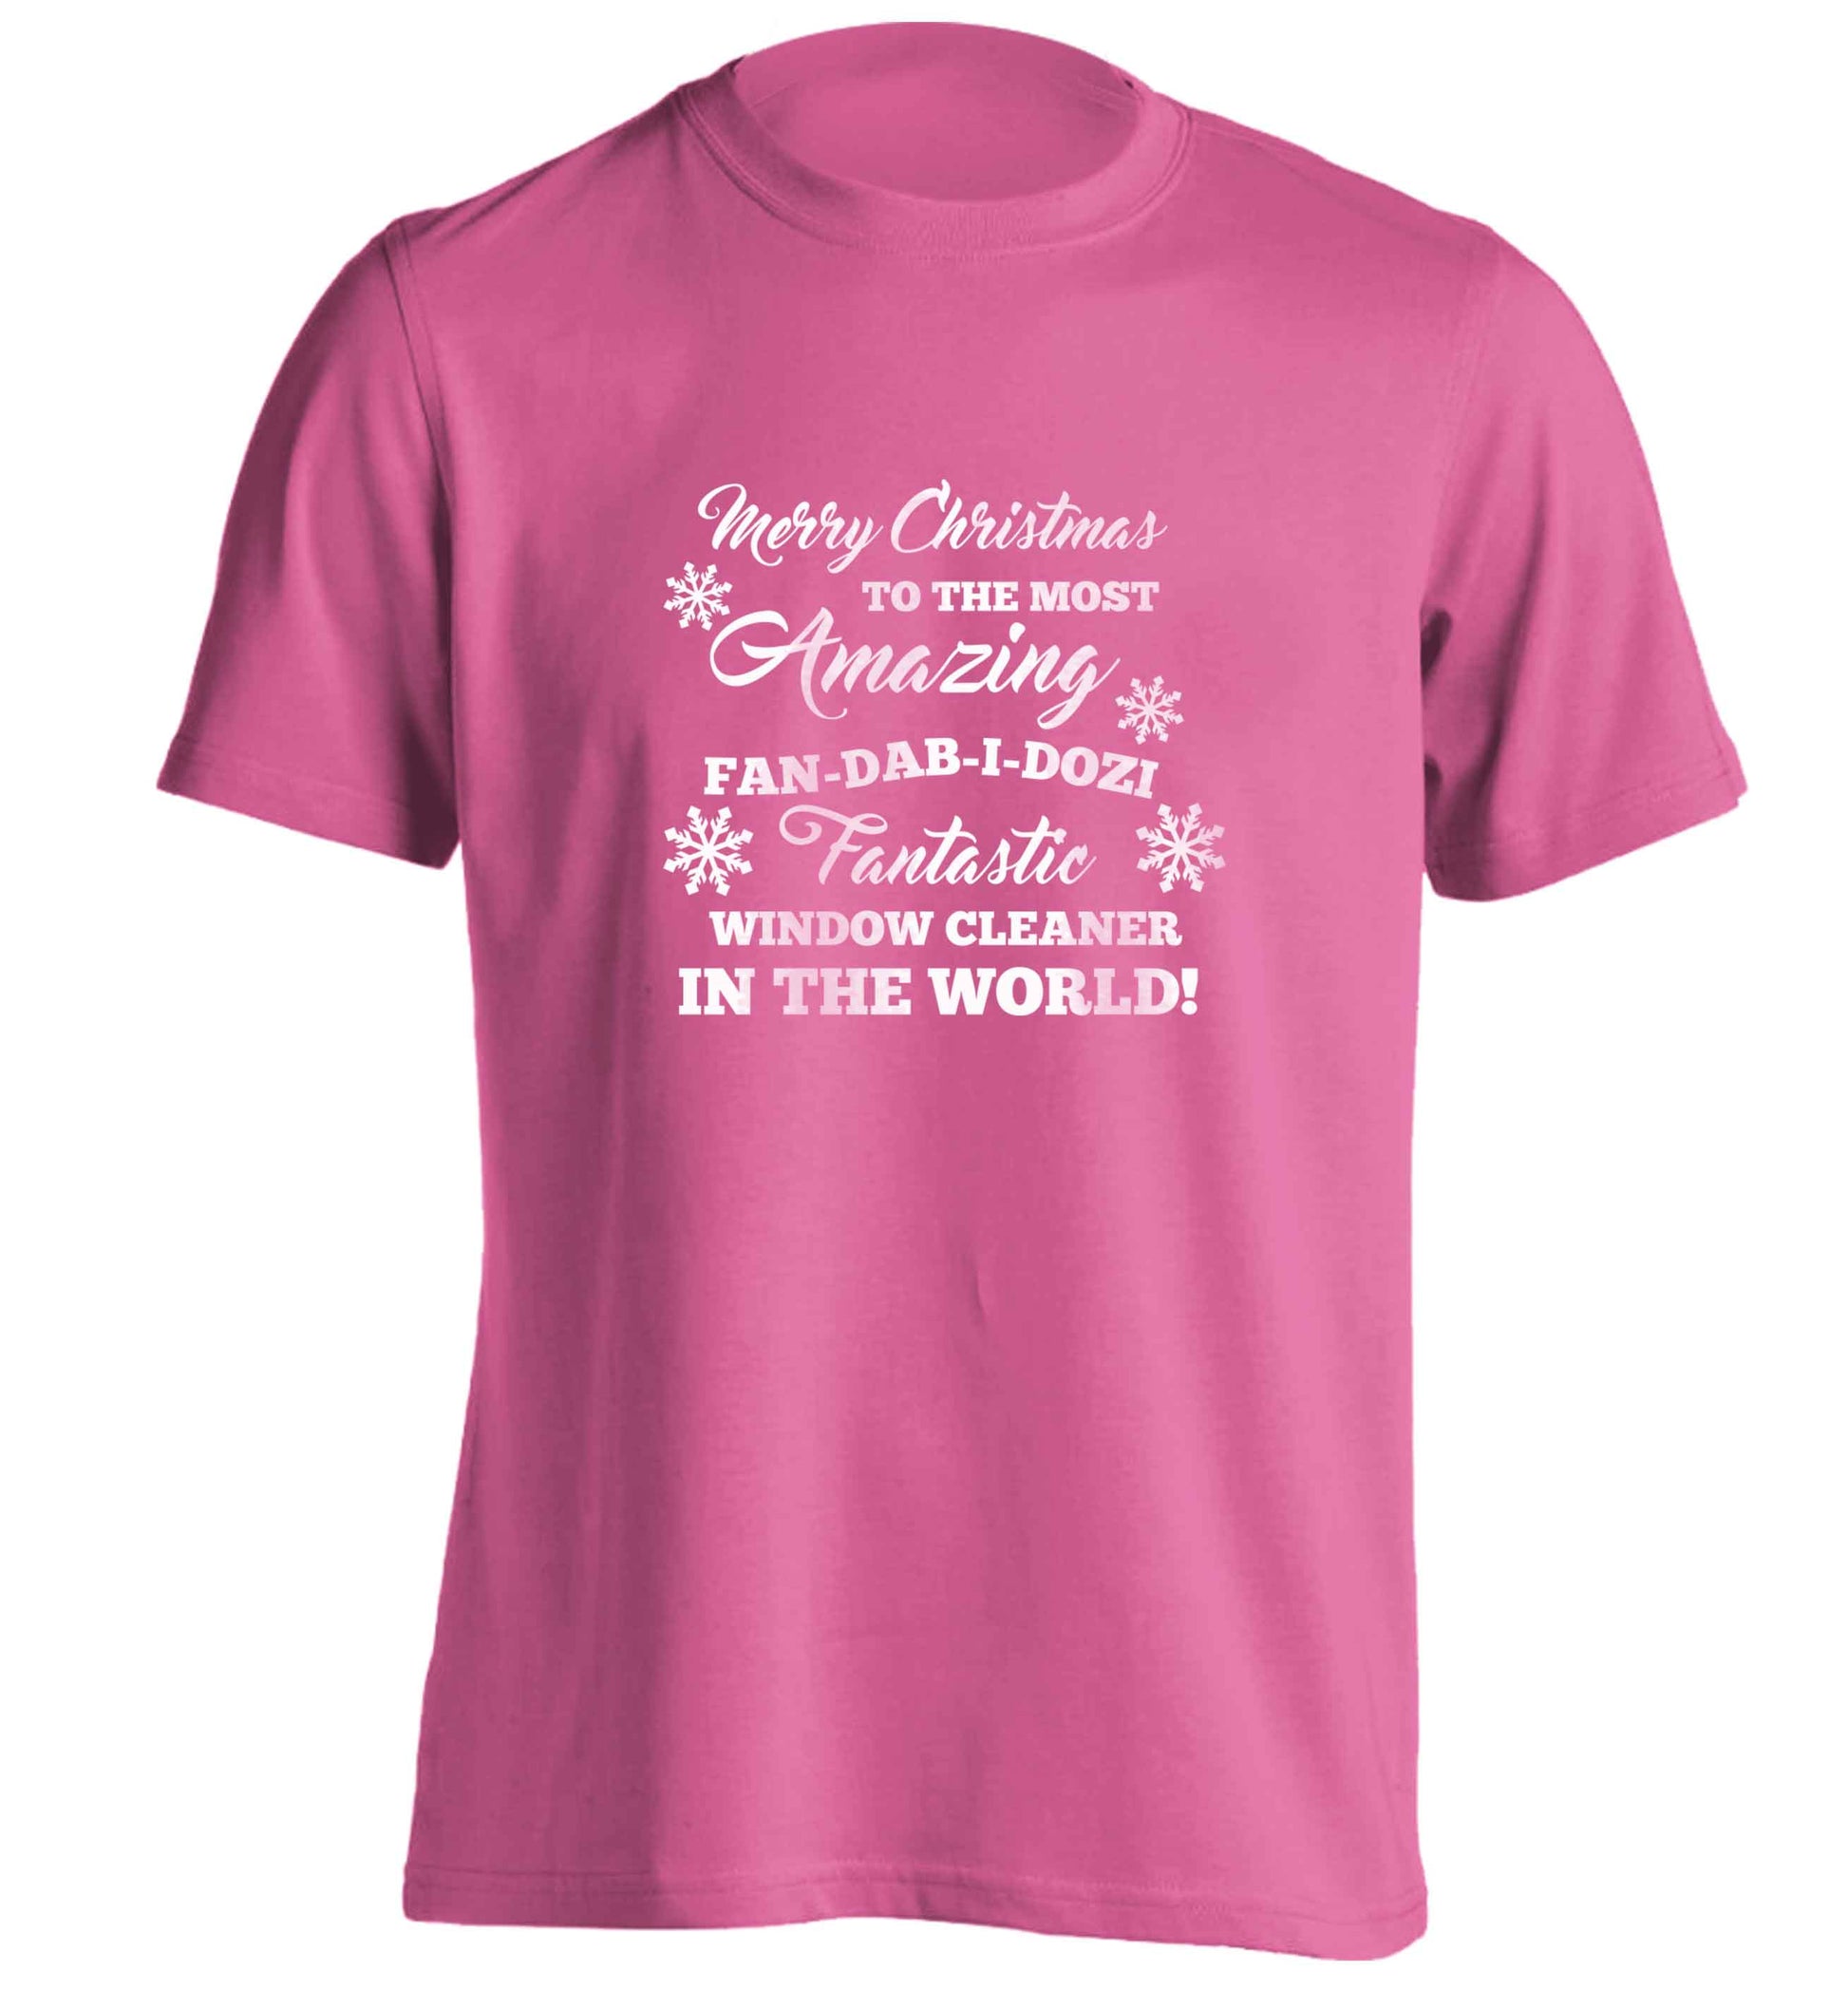 Merry Christmas to the most amazing window cleaner in the world! adults unisex pink Tshirt 2XL